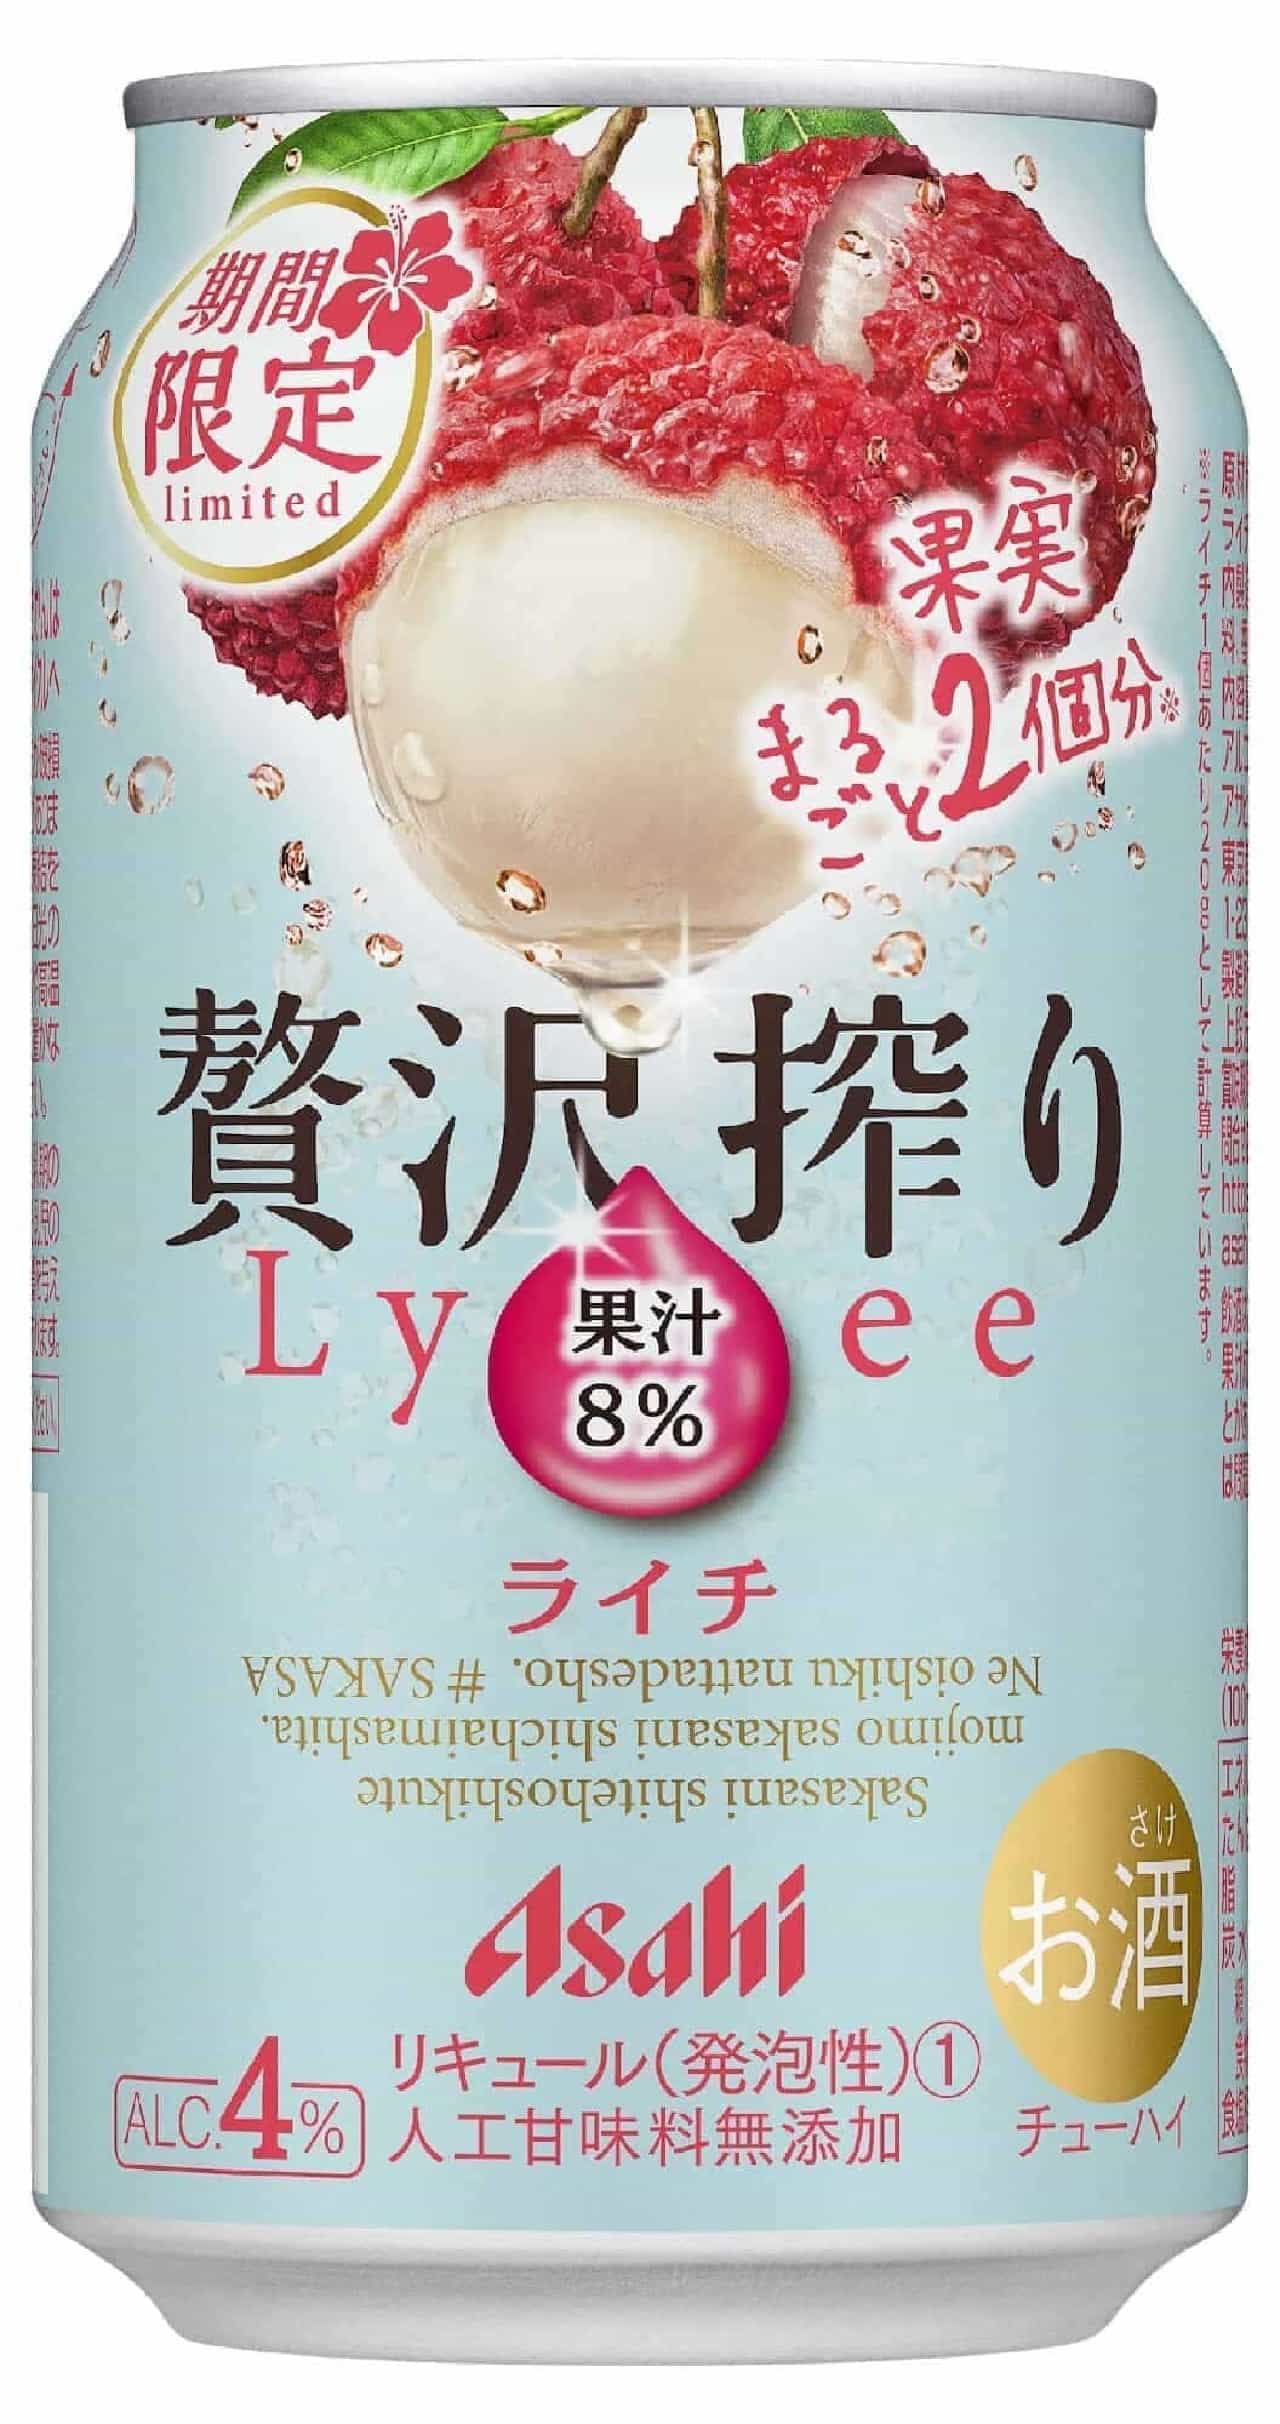 Limited time "Asahi luxury squeezing limited time lychee"